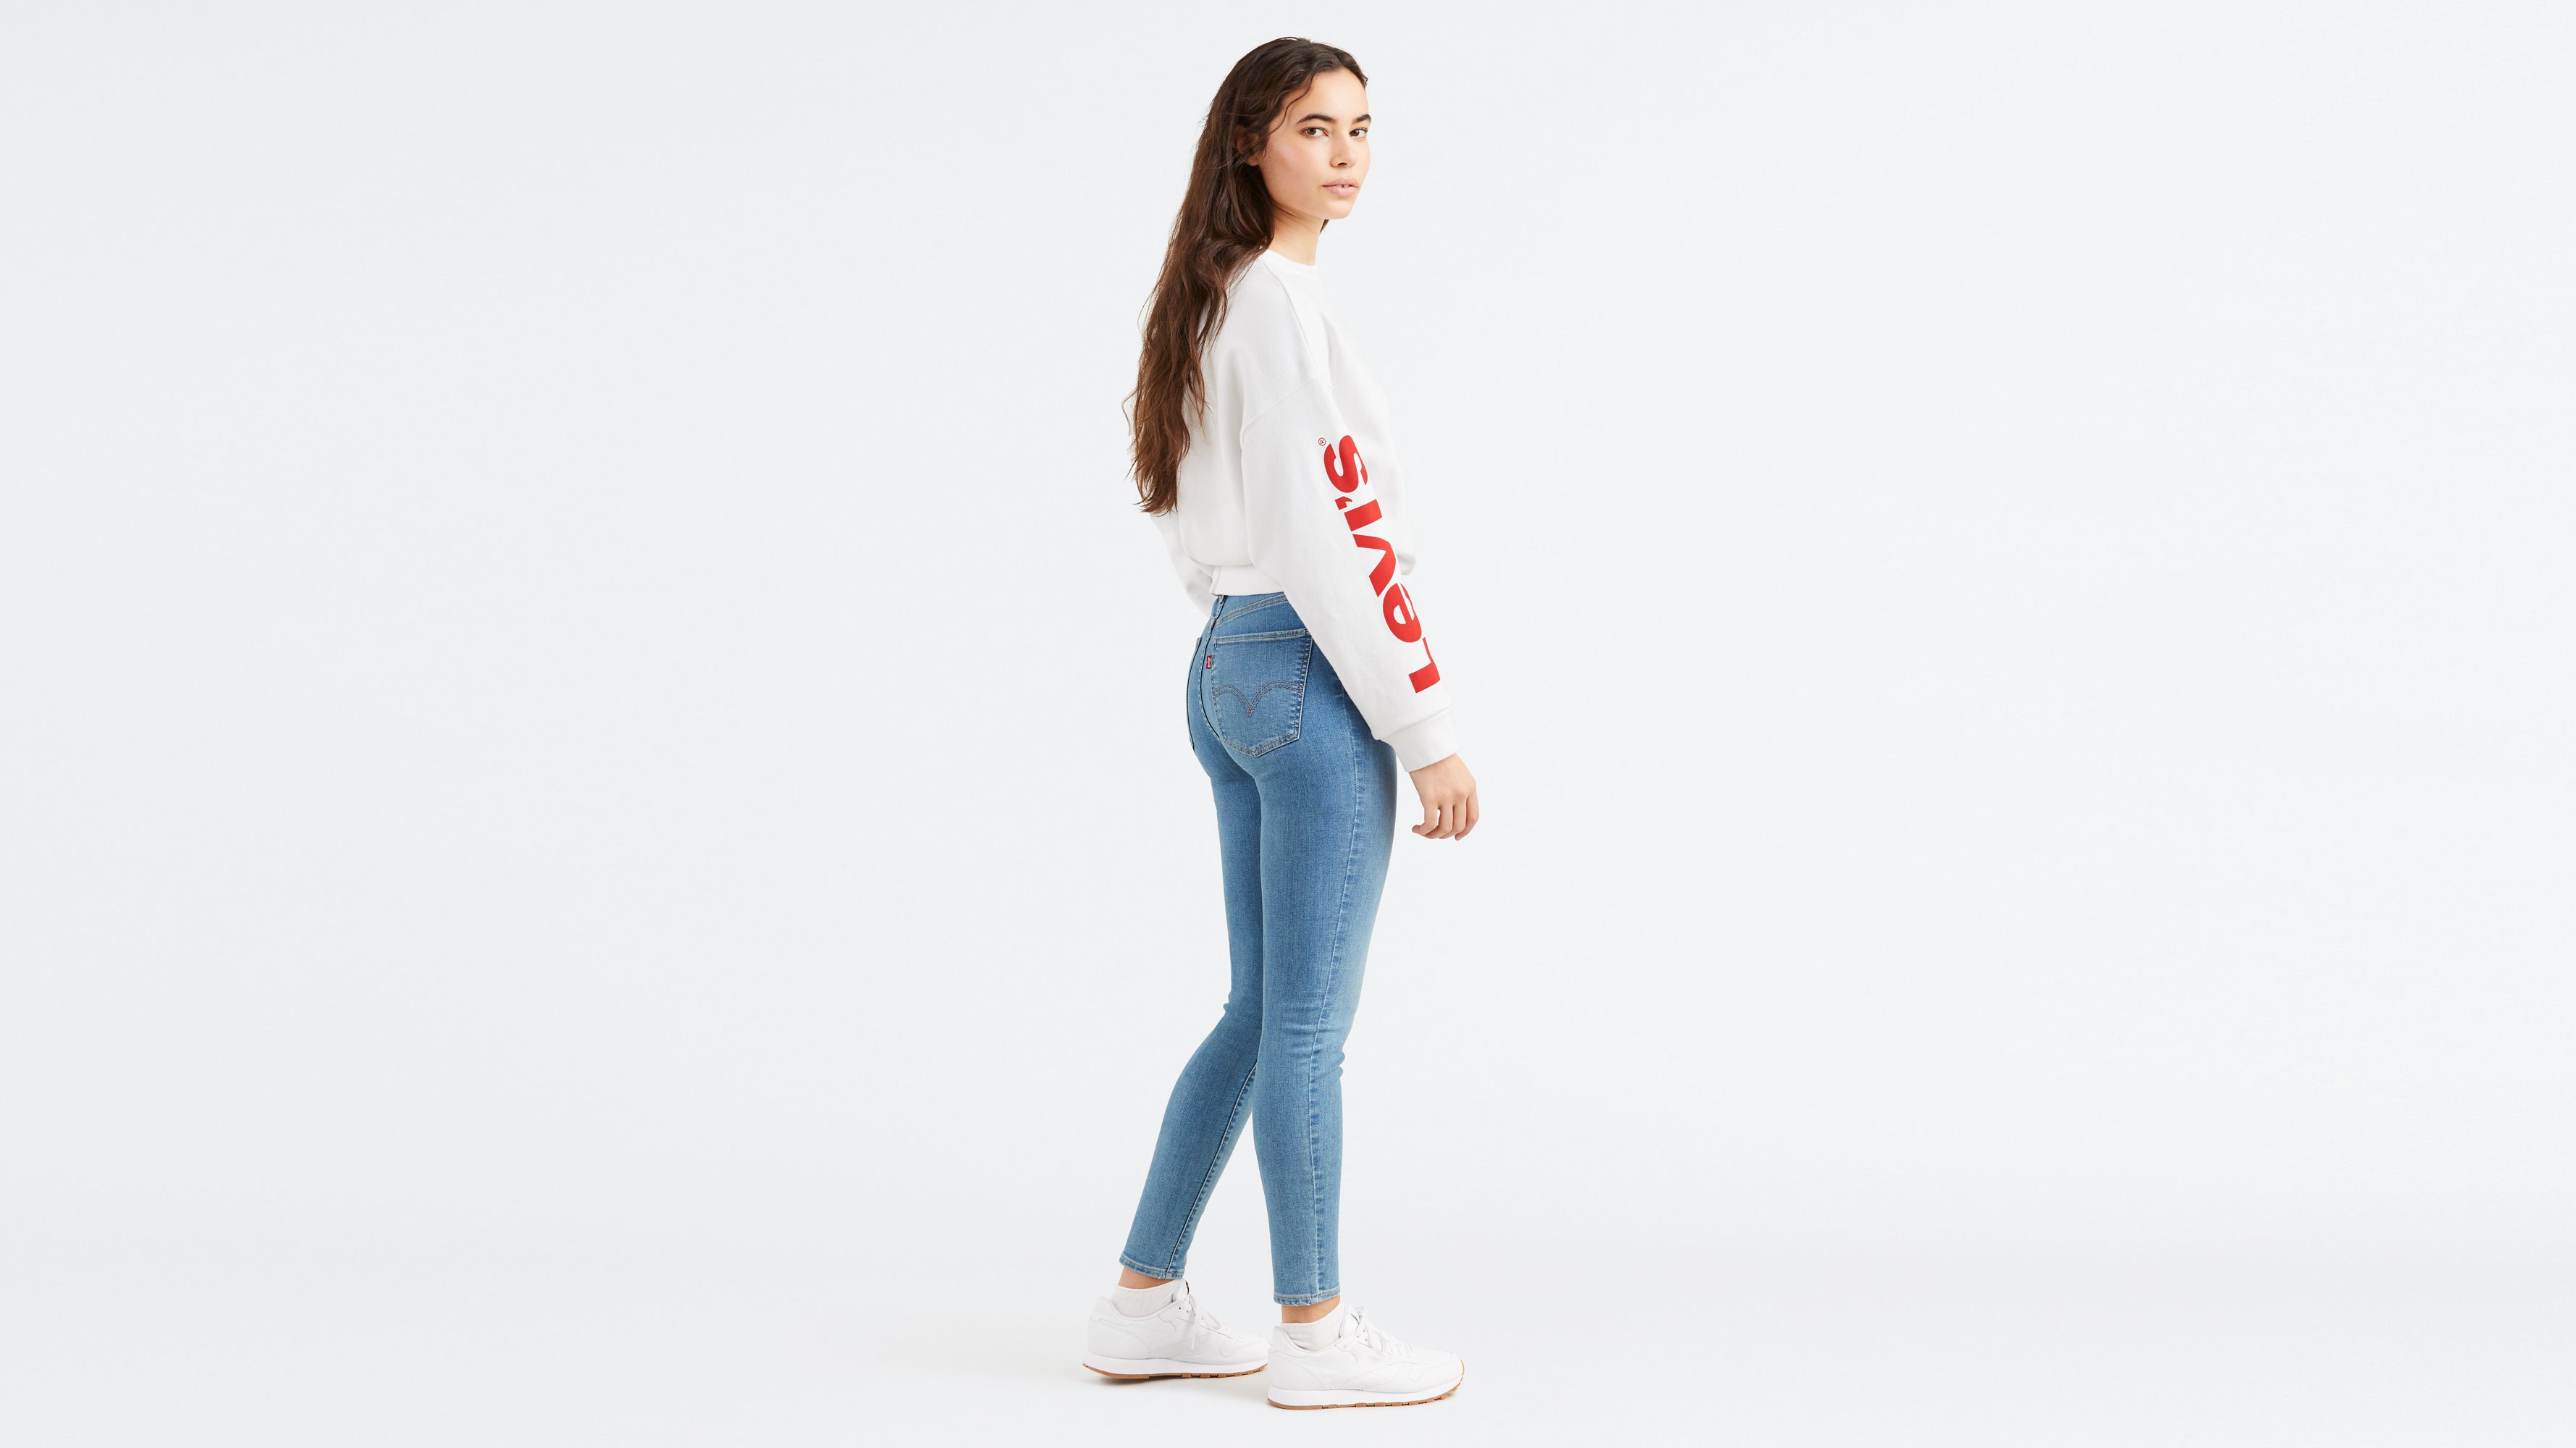 levi's mile high ankle jeans